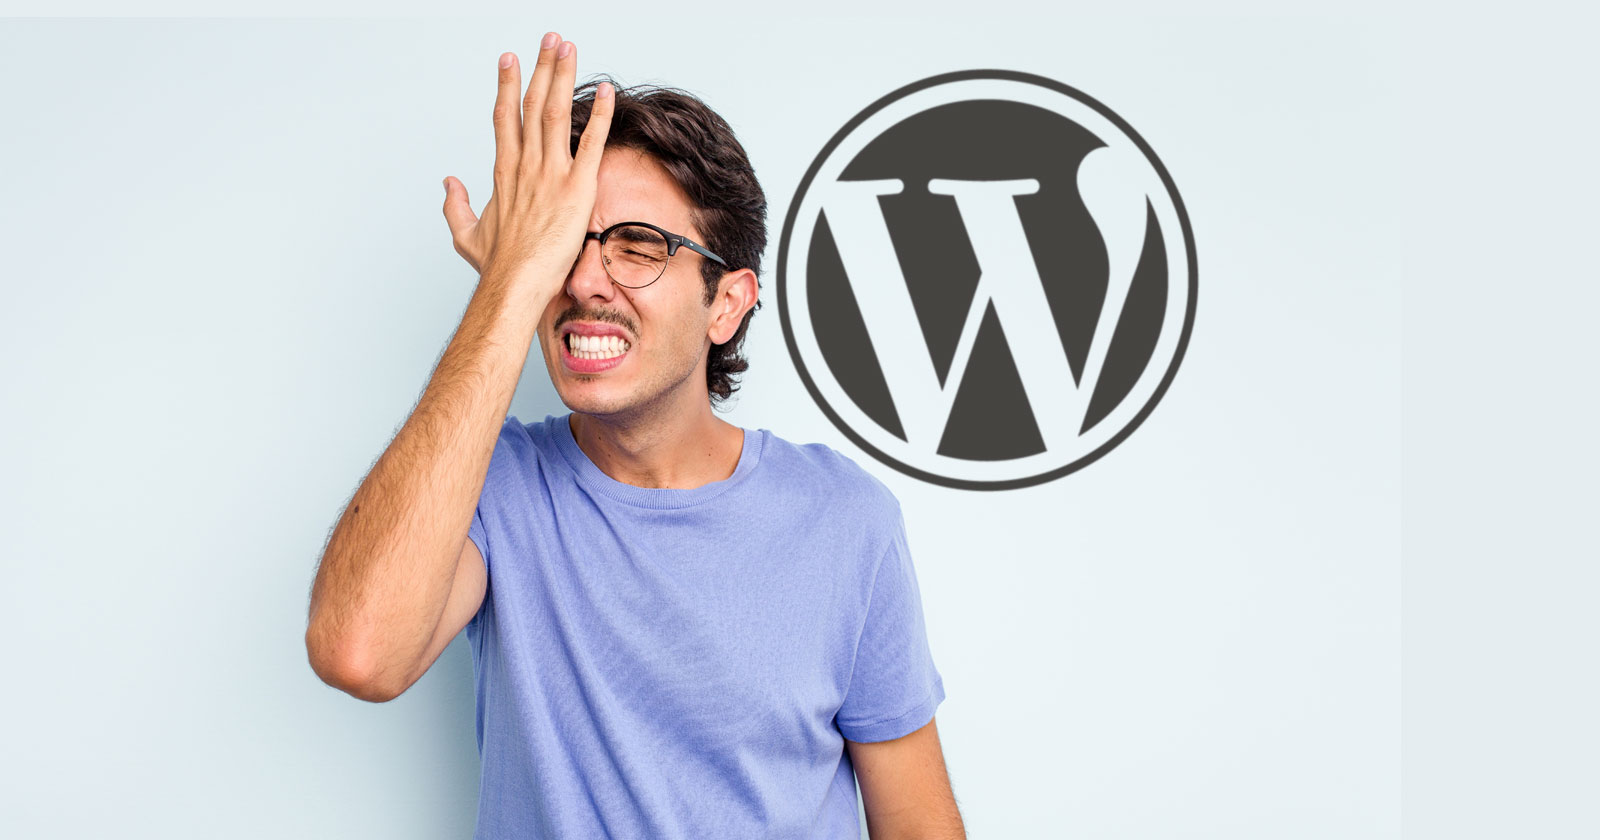 WordPress was hit by several security vulnerabilities in versions prior to 6.0.3